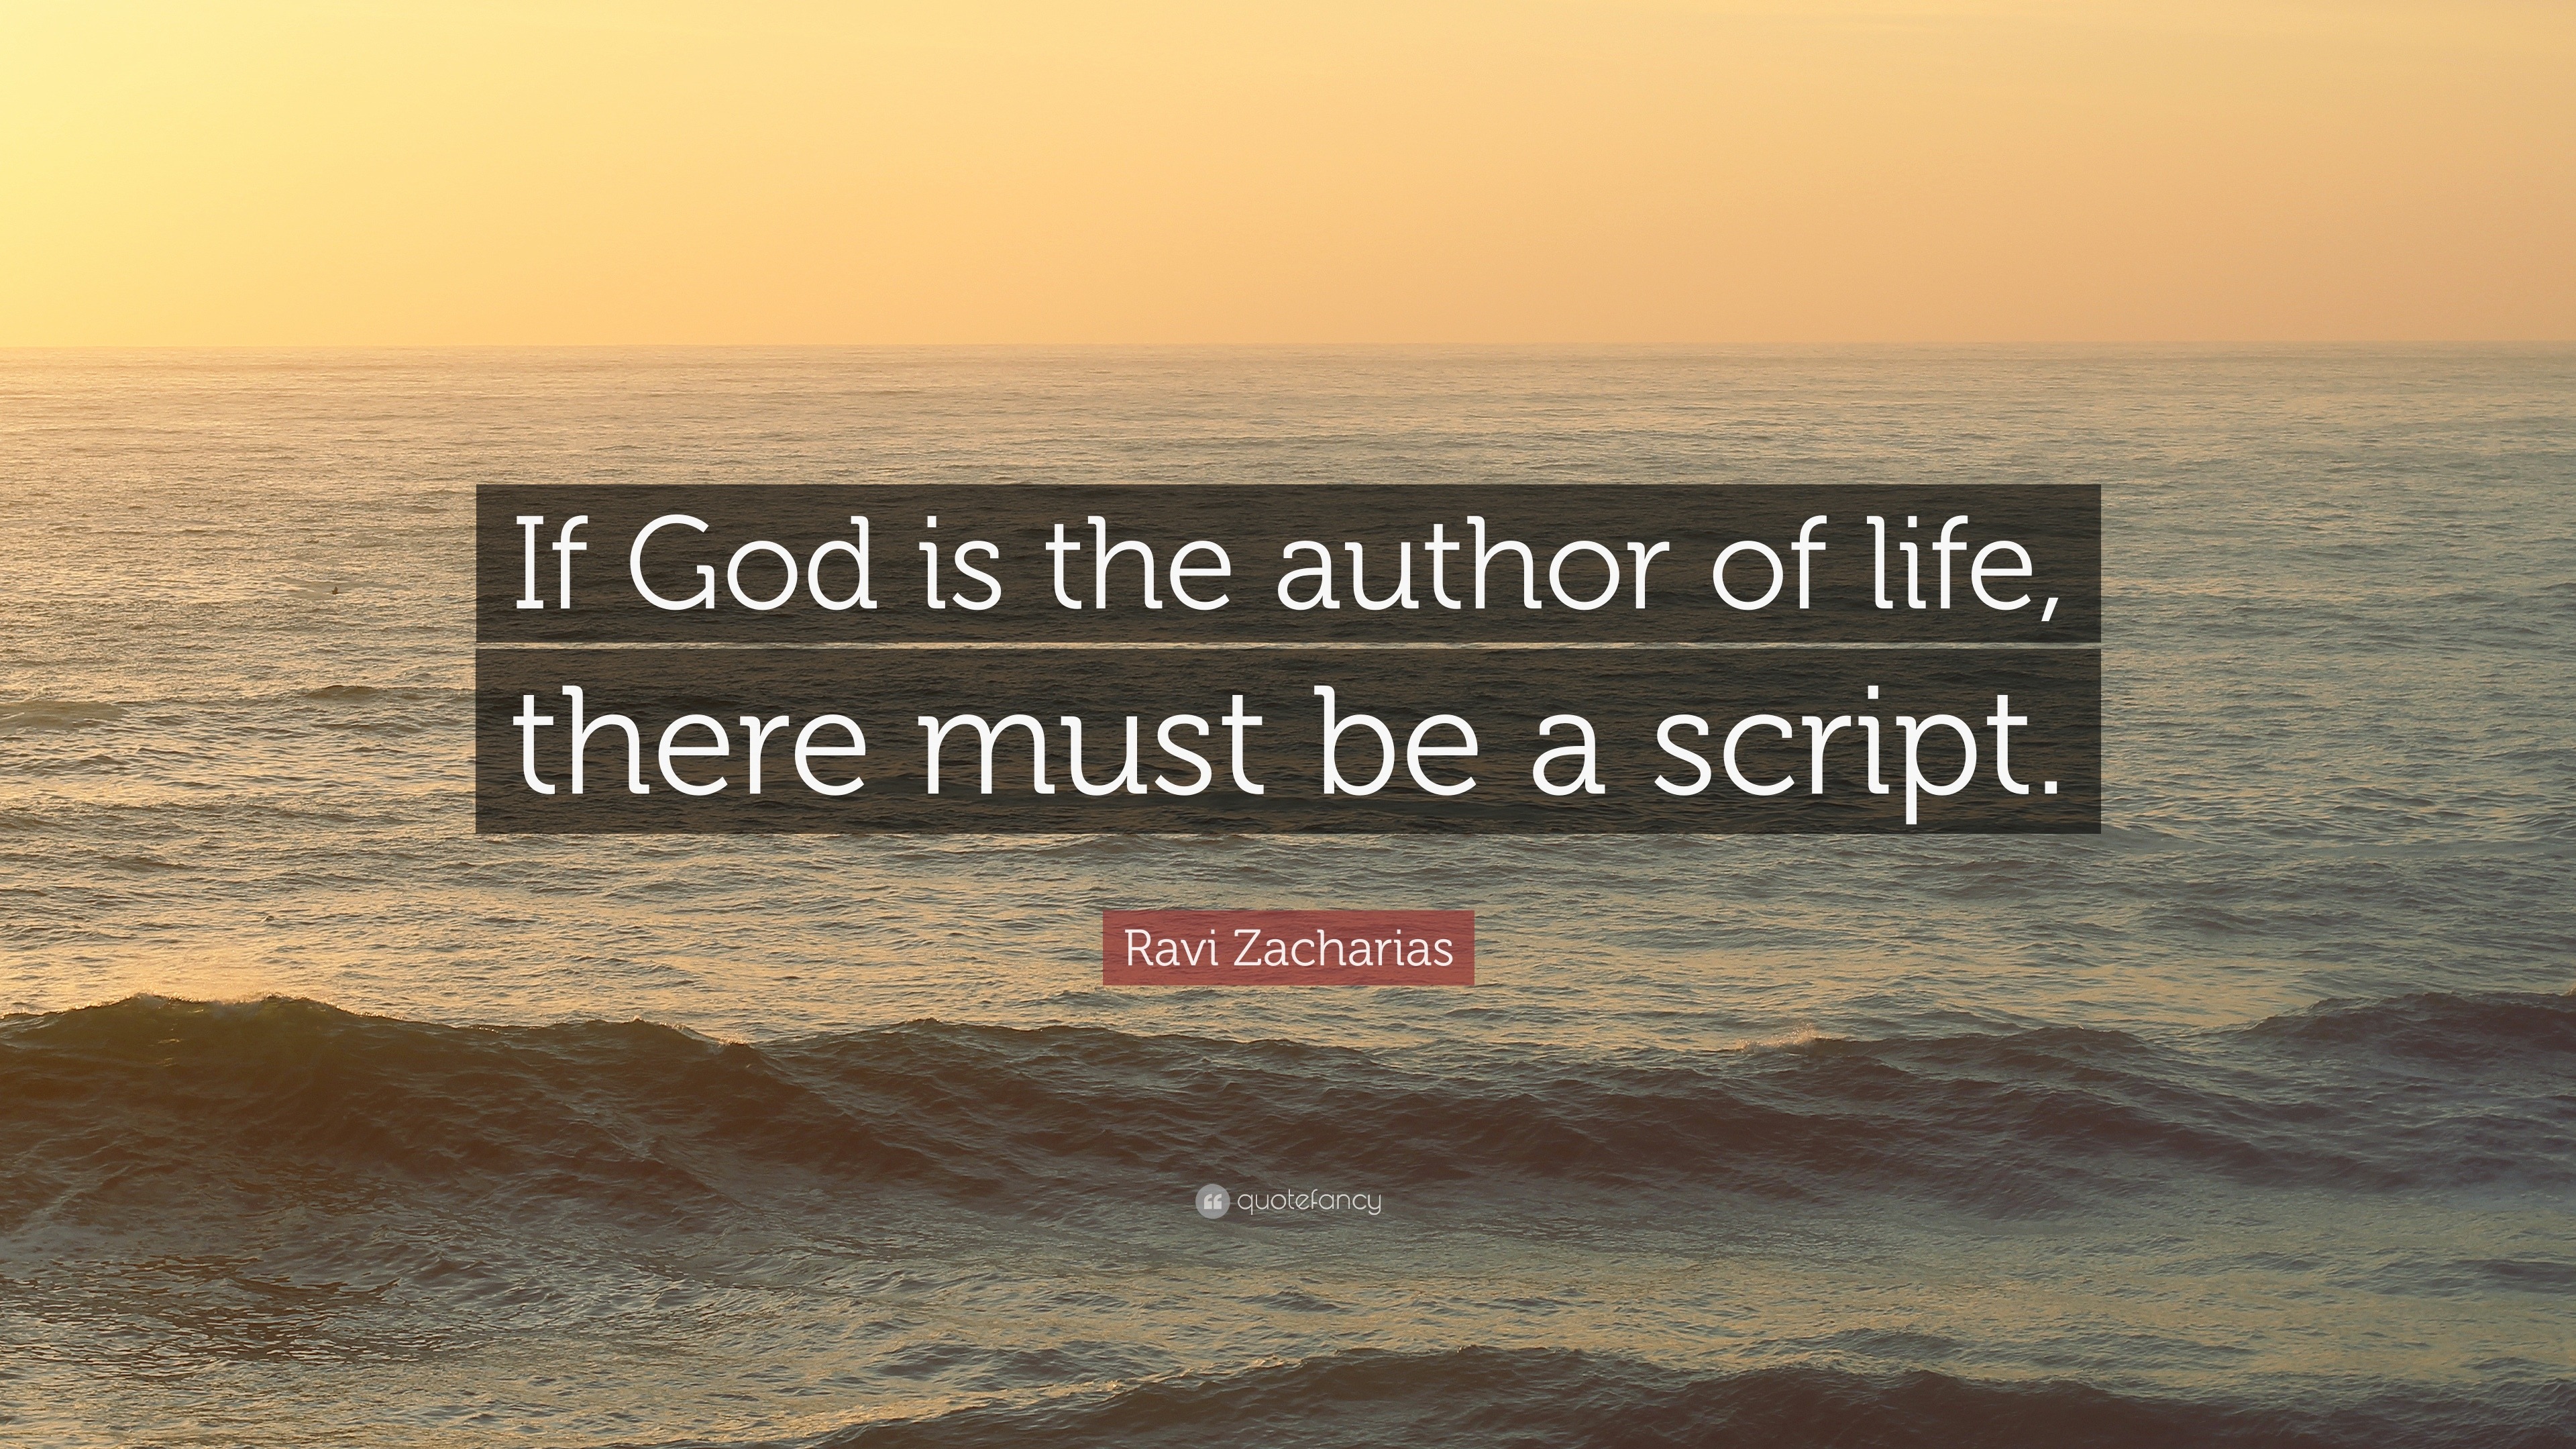 Ravi Zacharias Quote: “If God is the author of life, there must be a